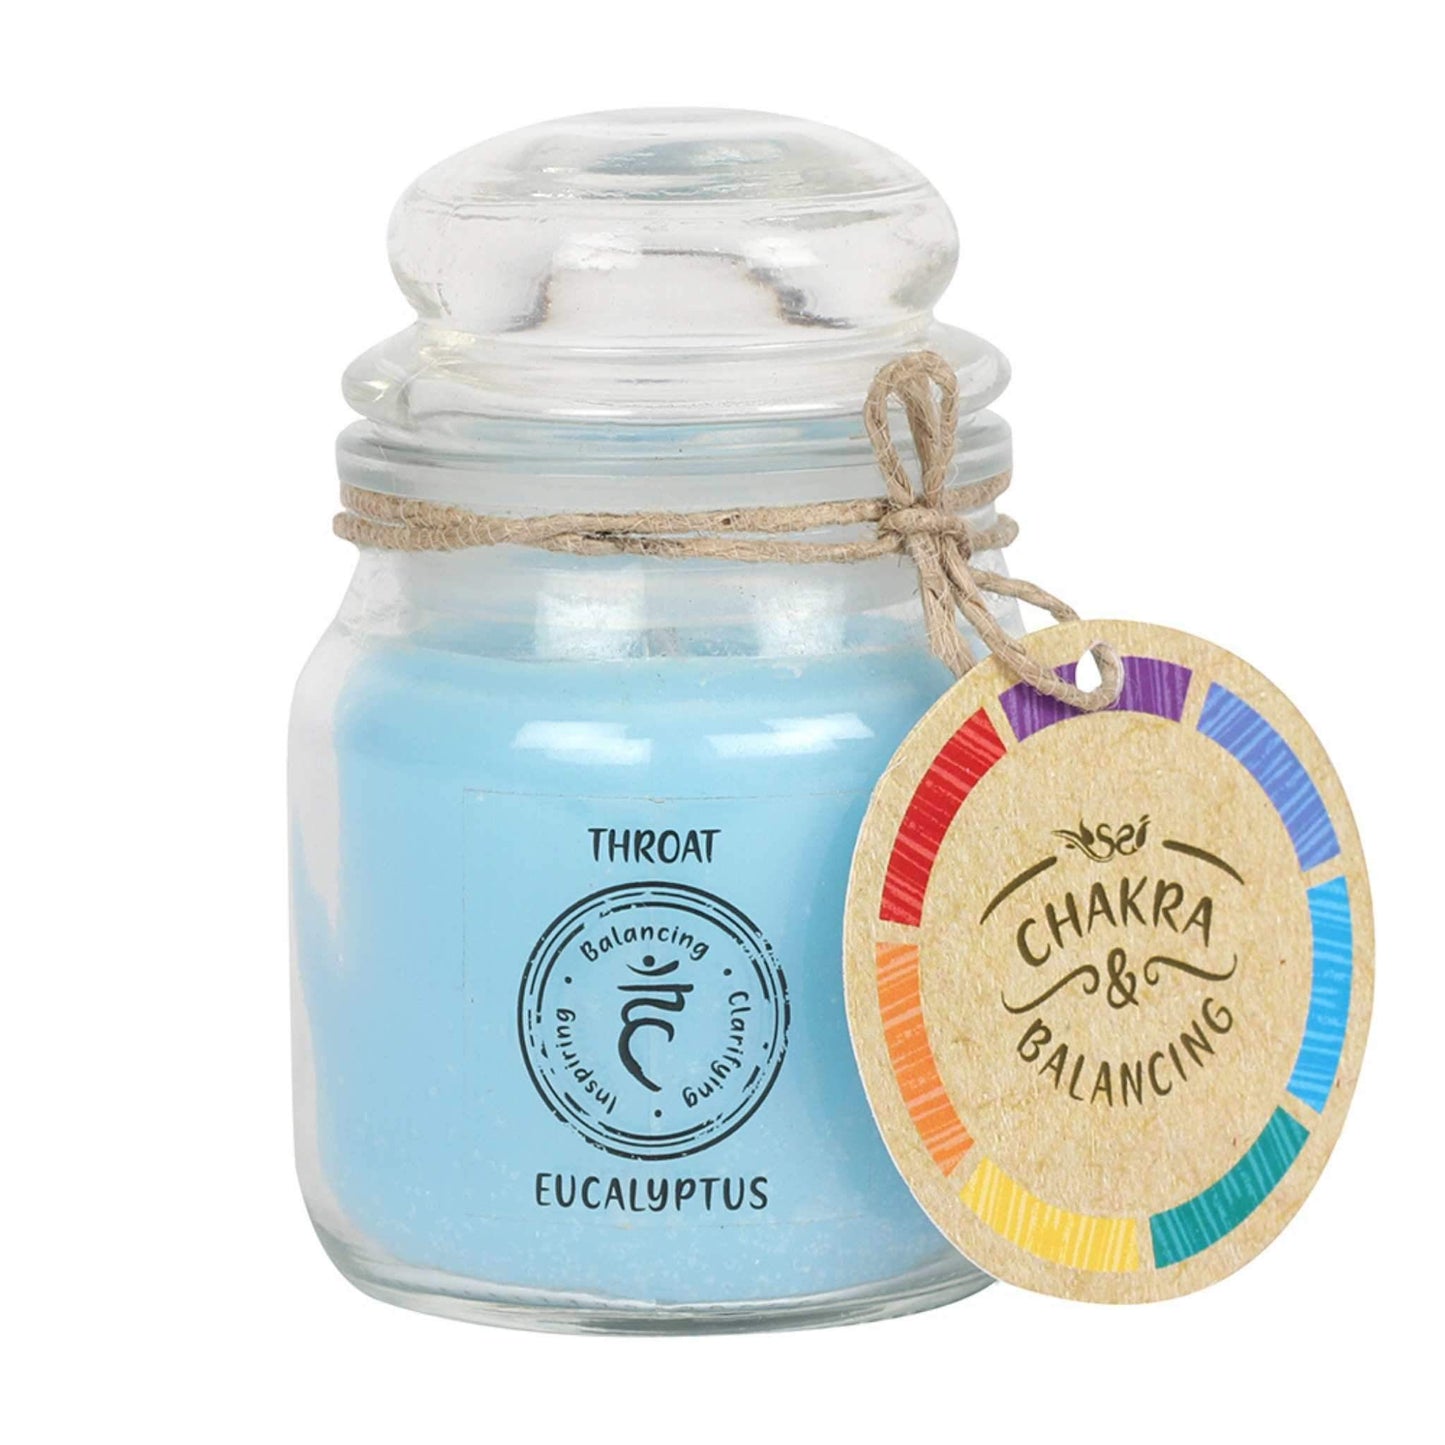 Balancing Chakra Candle in a min glass jar with stopper. Tied with a label that says Chakra Balancing. Candle is blue with a label on the jar that says Throat - Eucalyptus